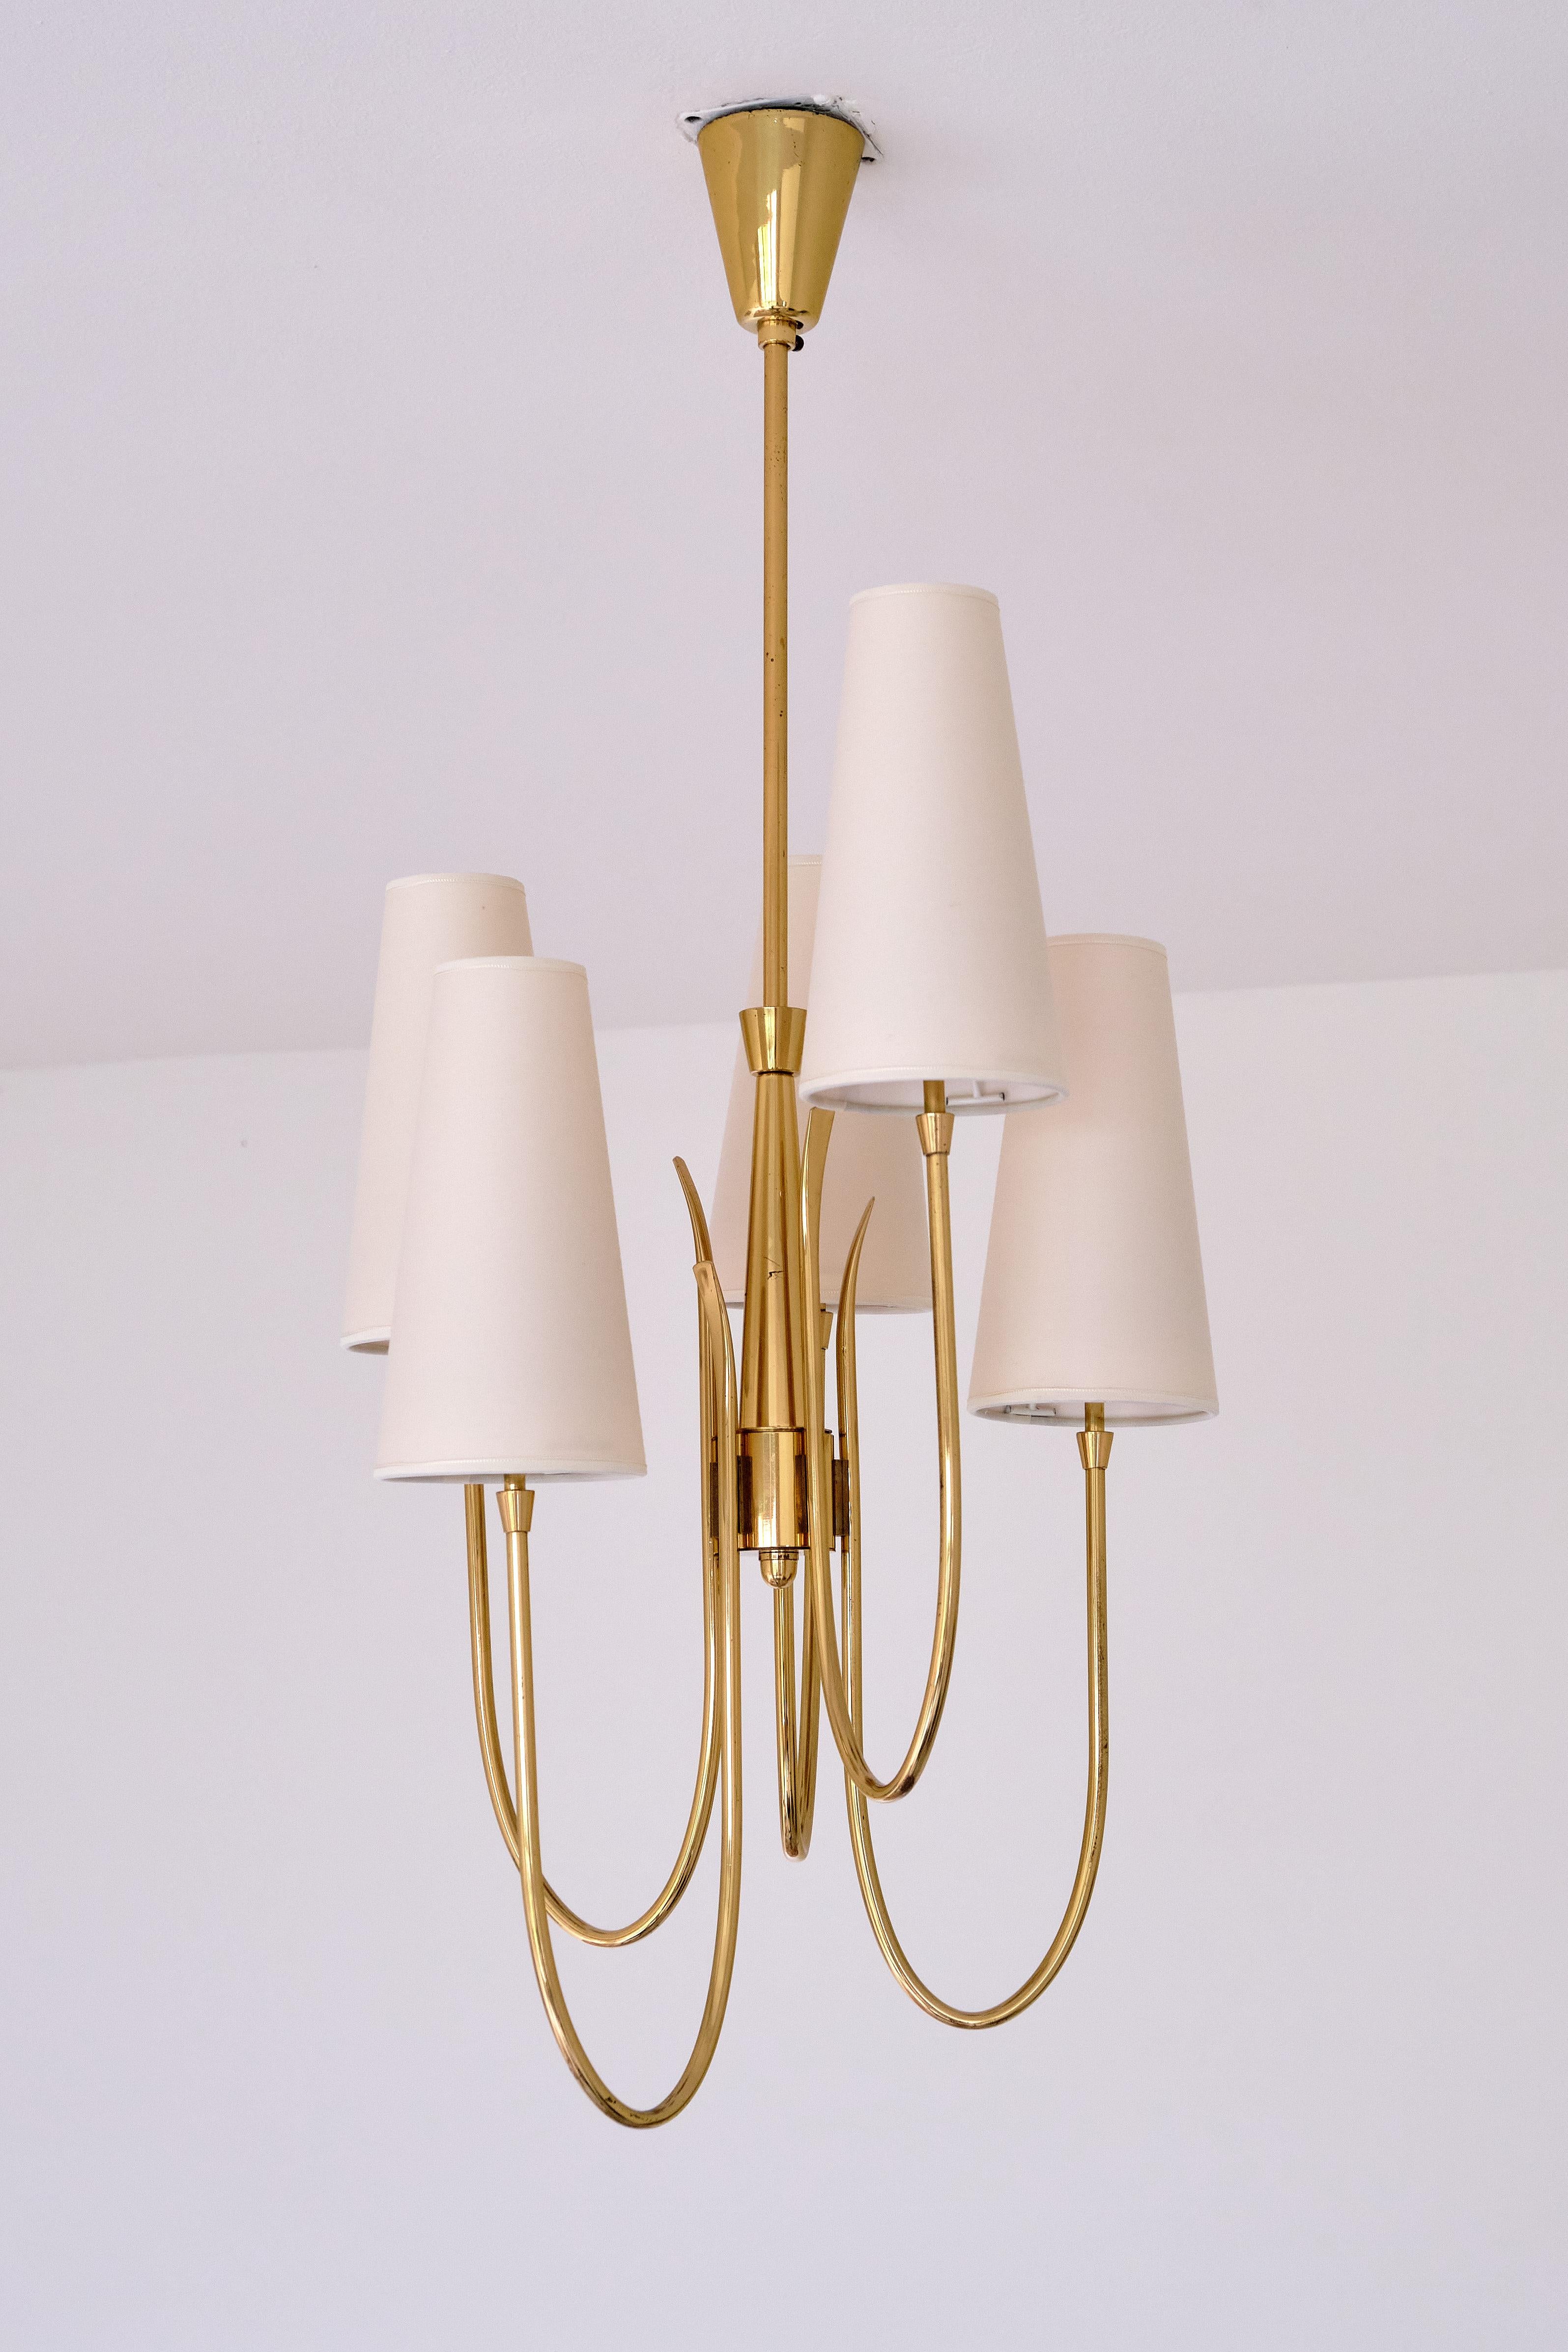 This striking, tall chandelier was produced in Italy in the late 1940s, with the design attributed to Guglielmo Ulrich. This brass fixture consists of five arms of different heights which gives the design a distinct and elegant appearance . The